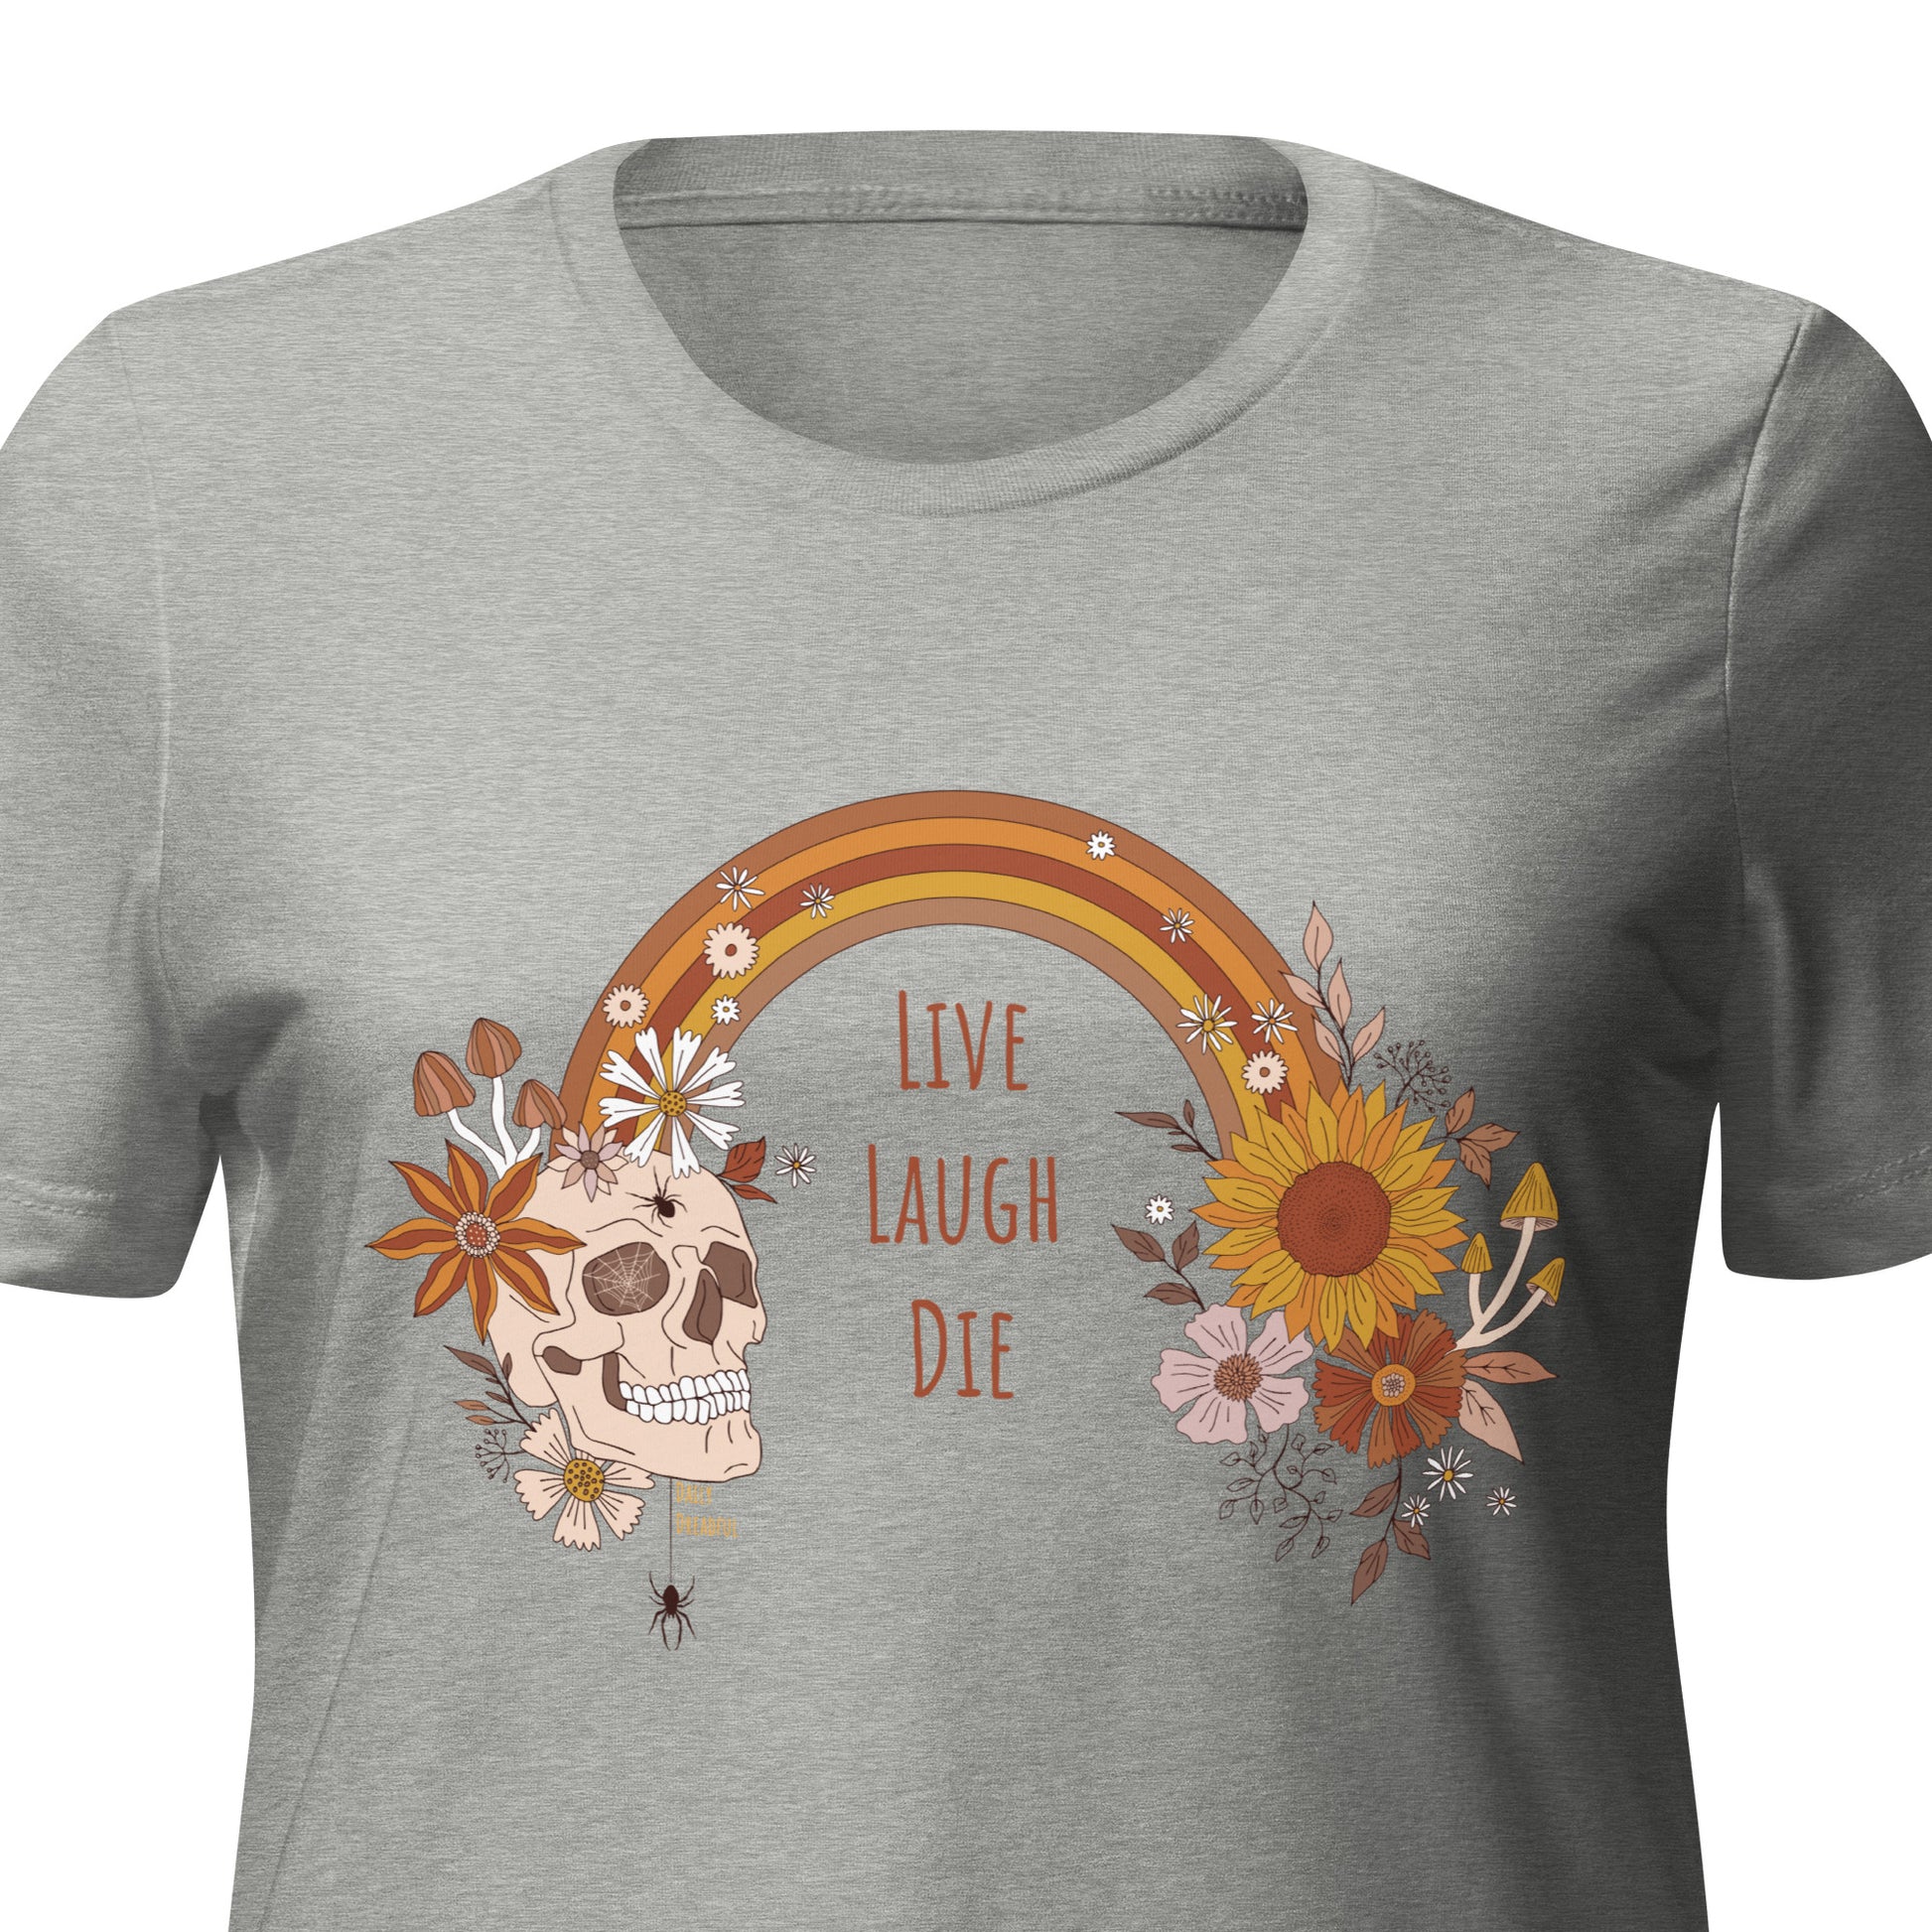 "Live, Laugh, Die" relaxed tri-blend t-shirt, athletic grey colored tee